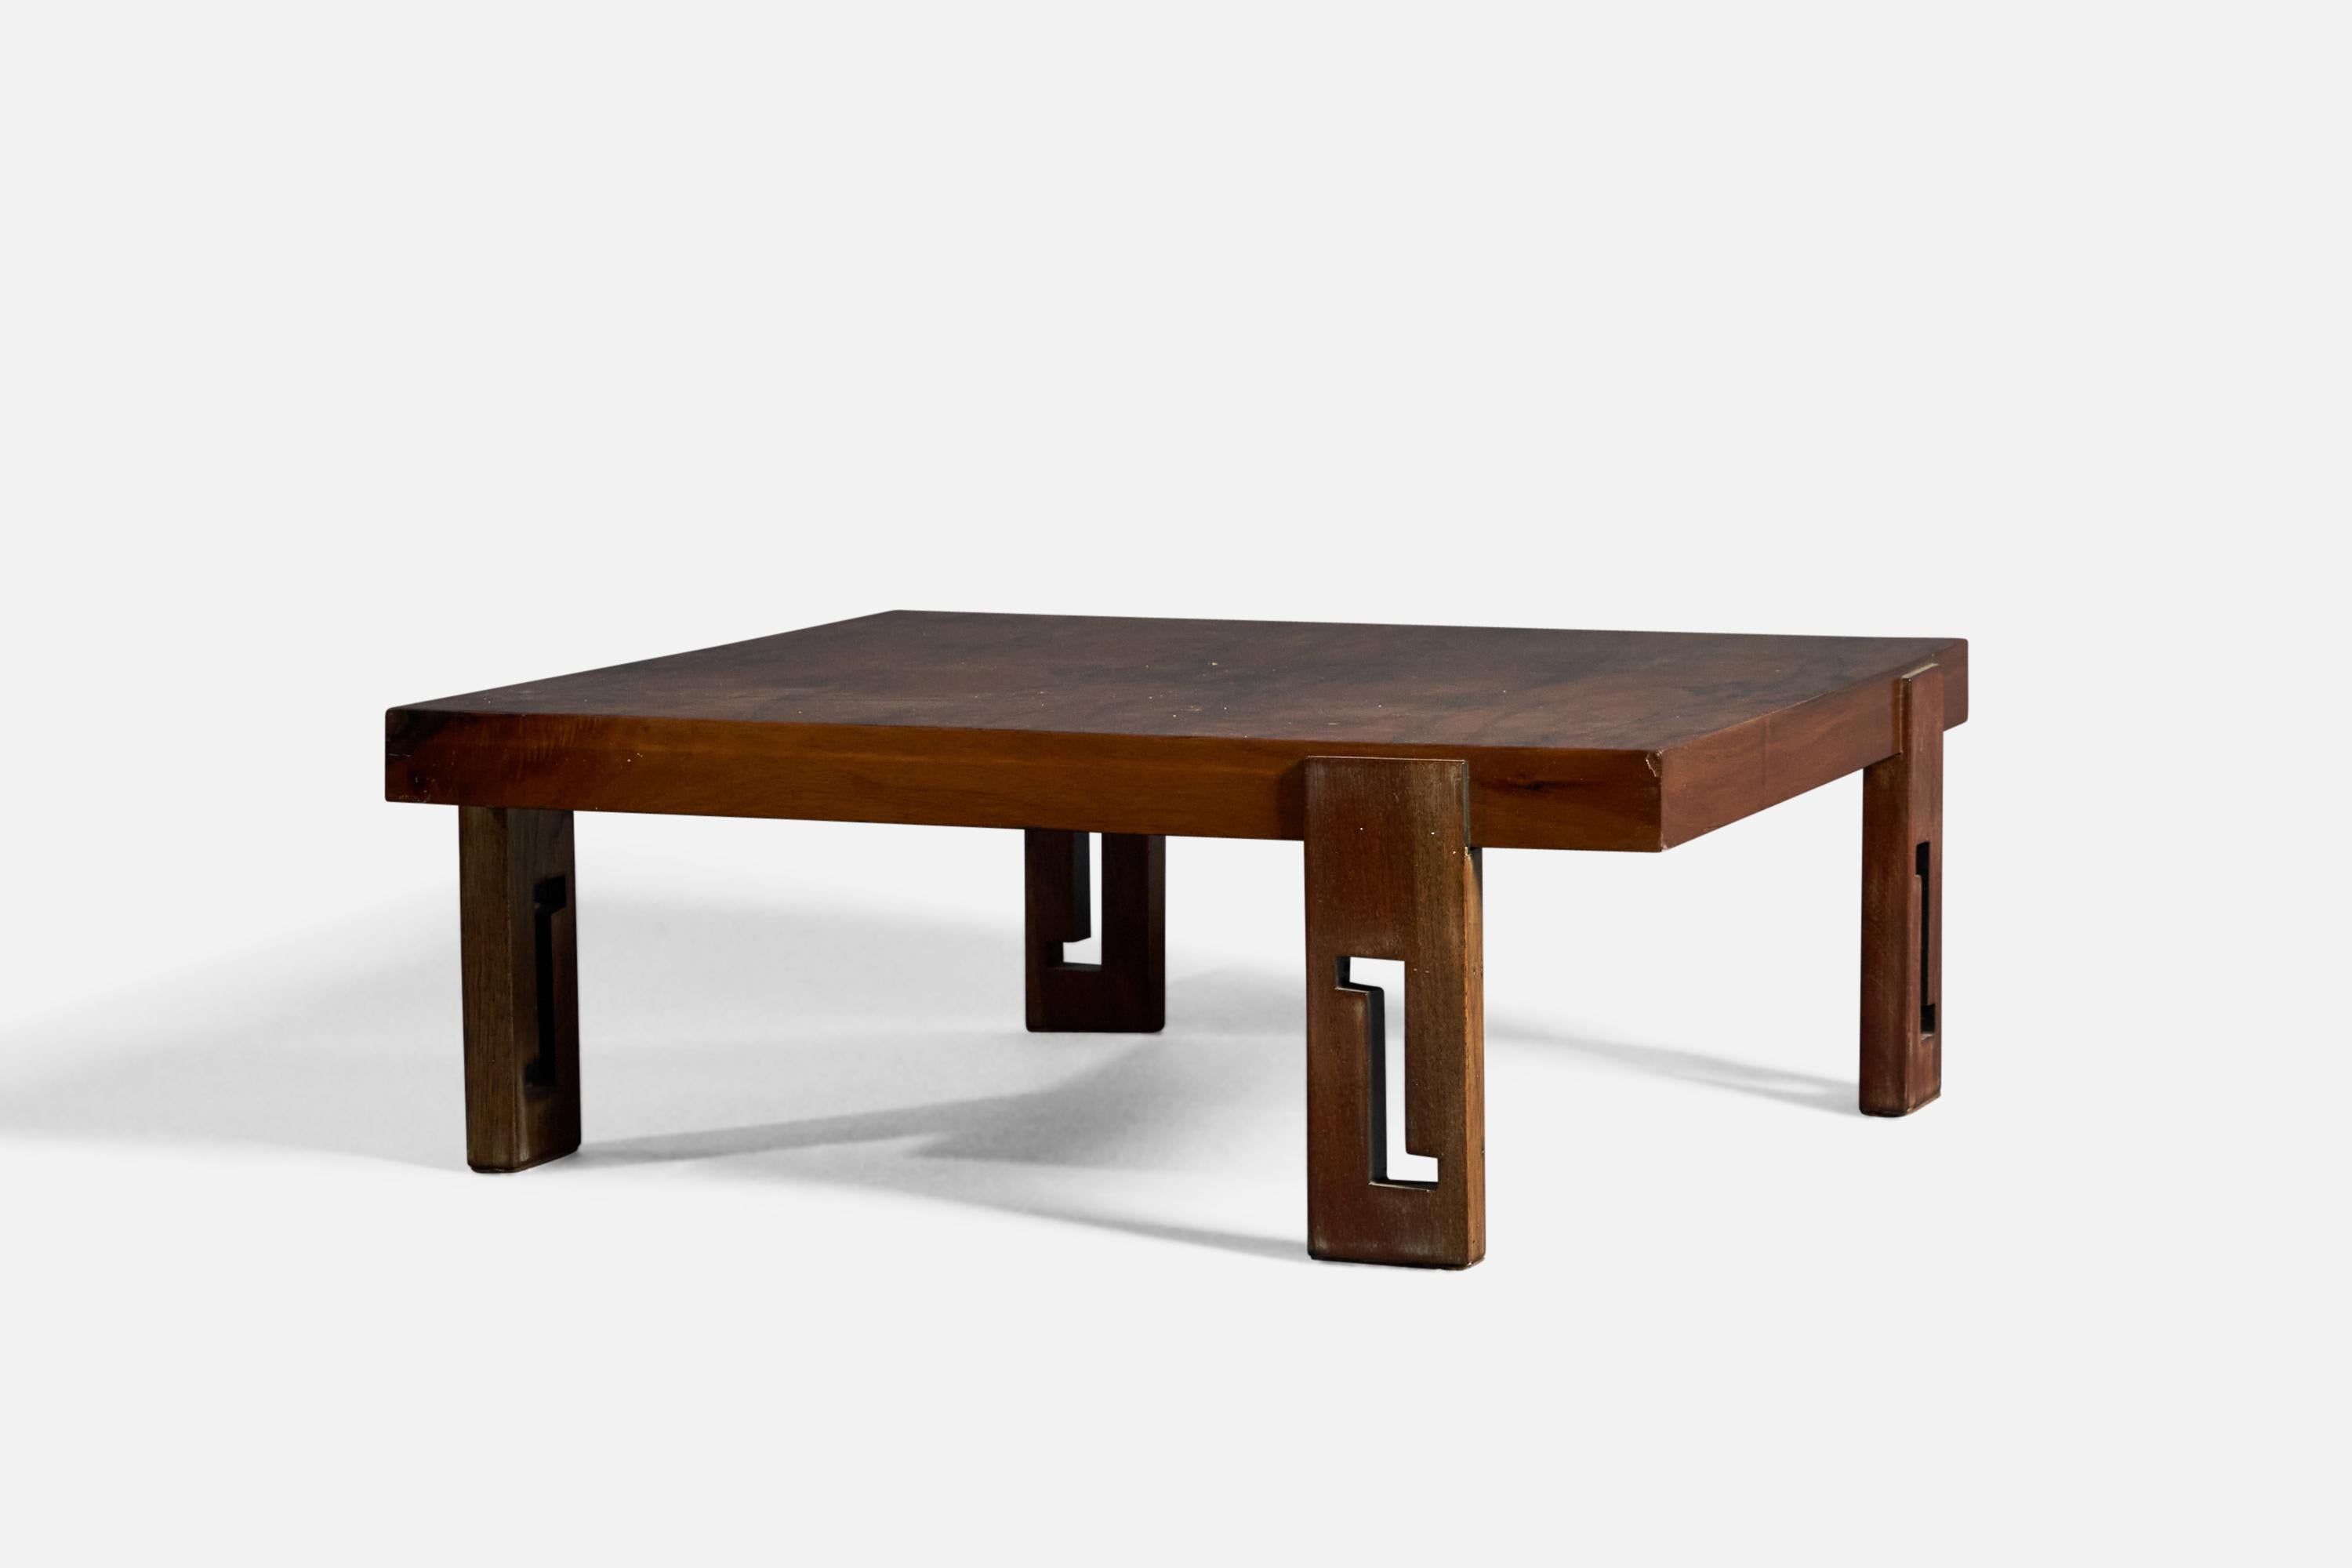 A rosewood coffee table designed and produced in Brazil, c. 1950s.